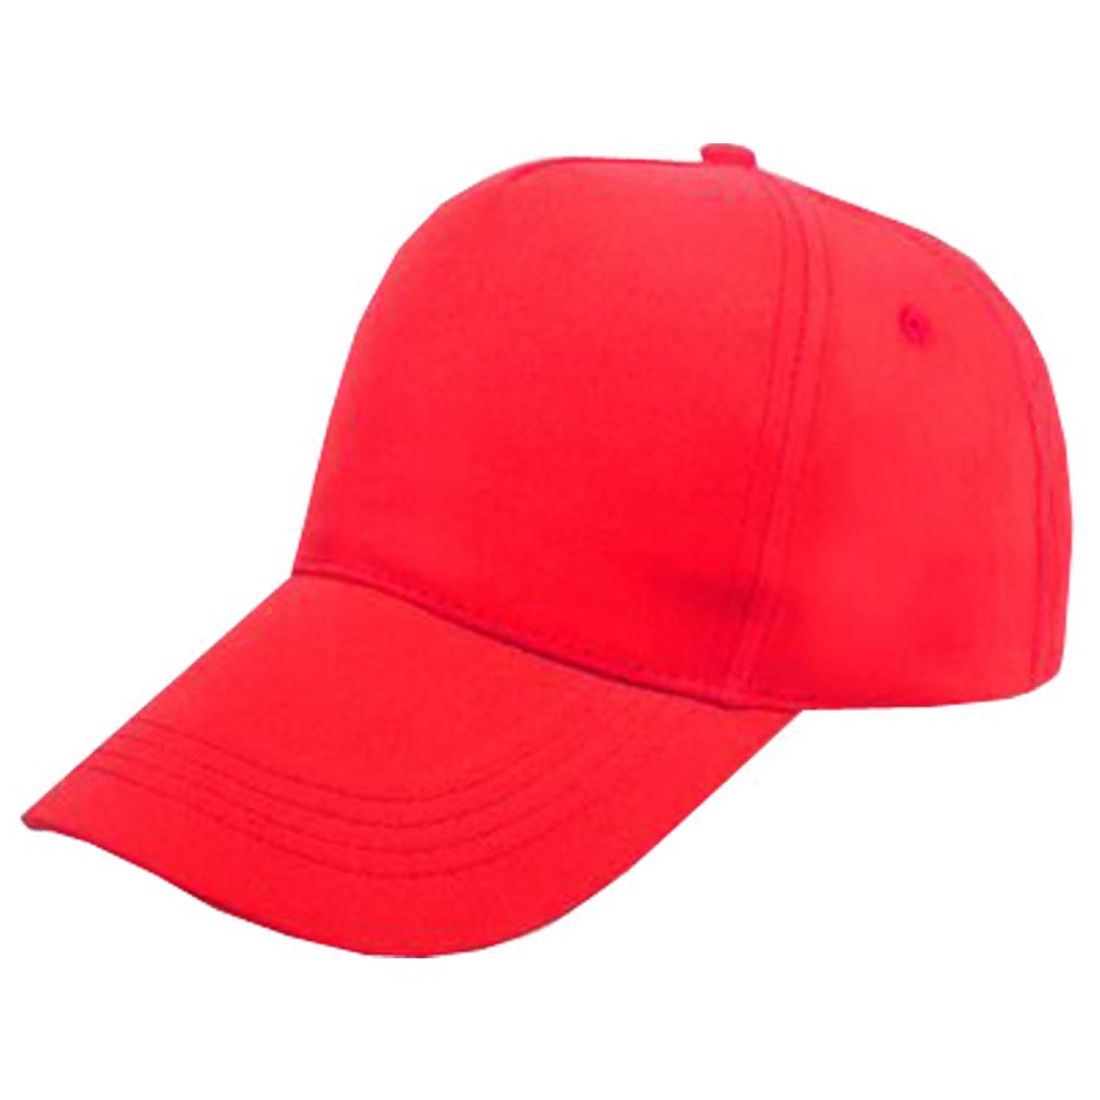 5-Panel Structured Promotional Cap